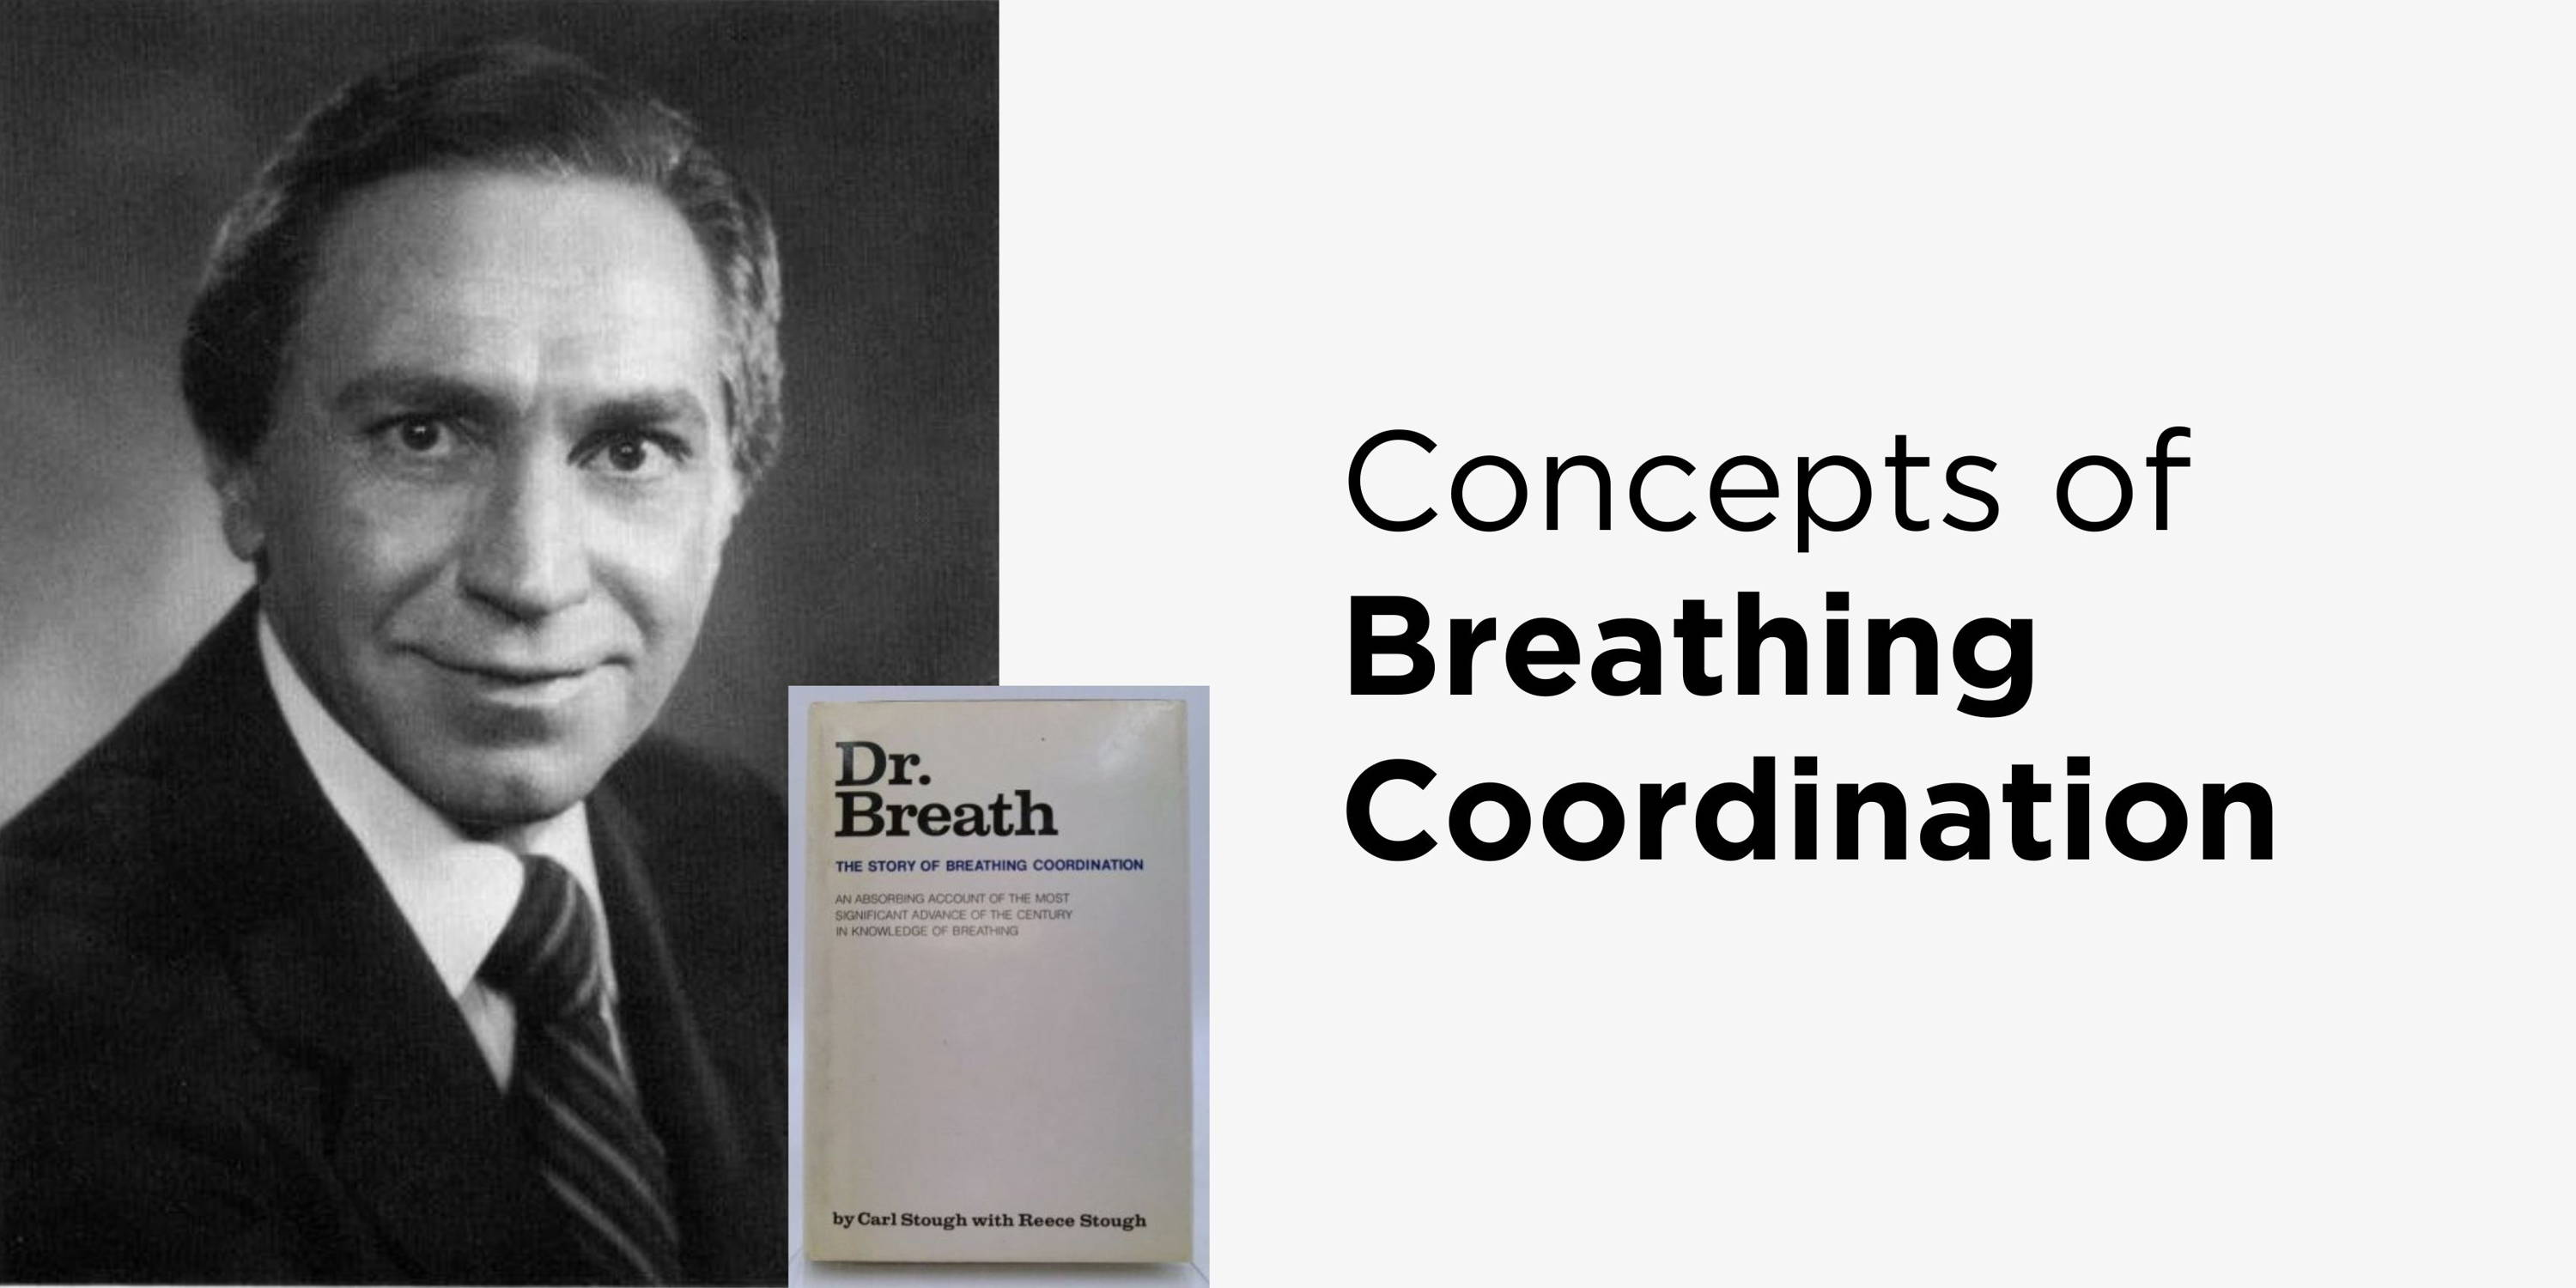 Carl Stough's Concepts of Breathing Coordination